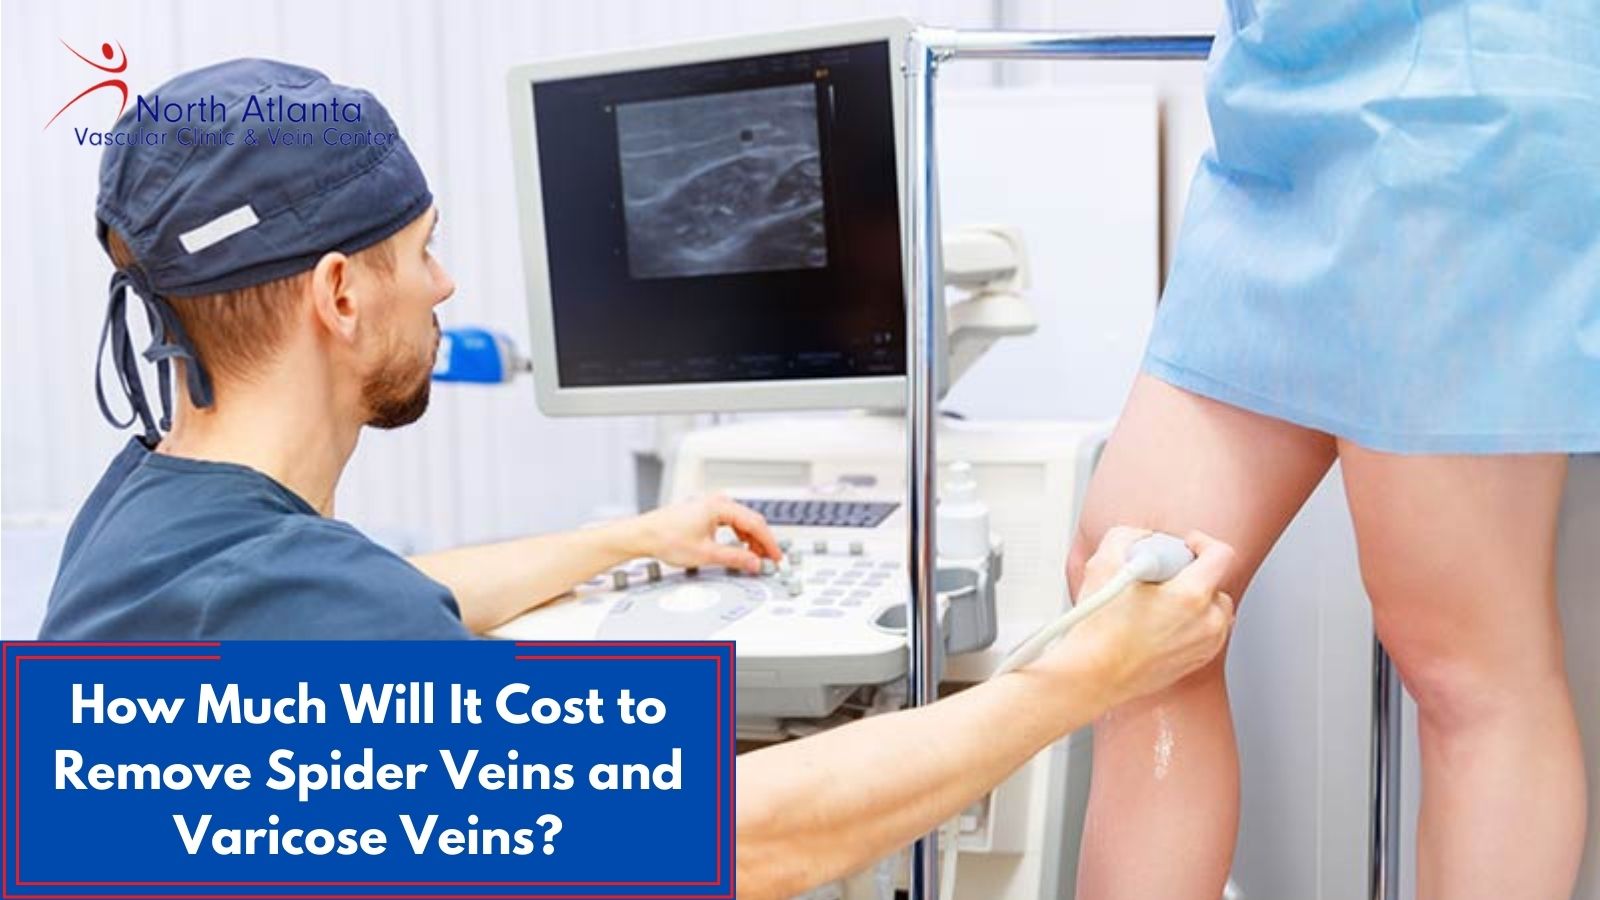 How Much Will It Cost to Remove Spider Veins and Varicose Veins?